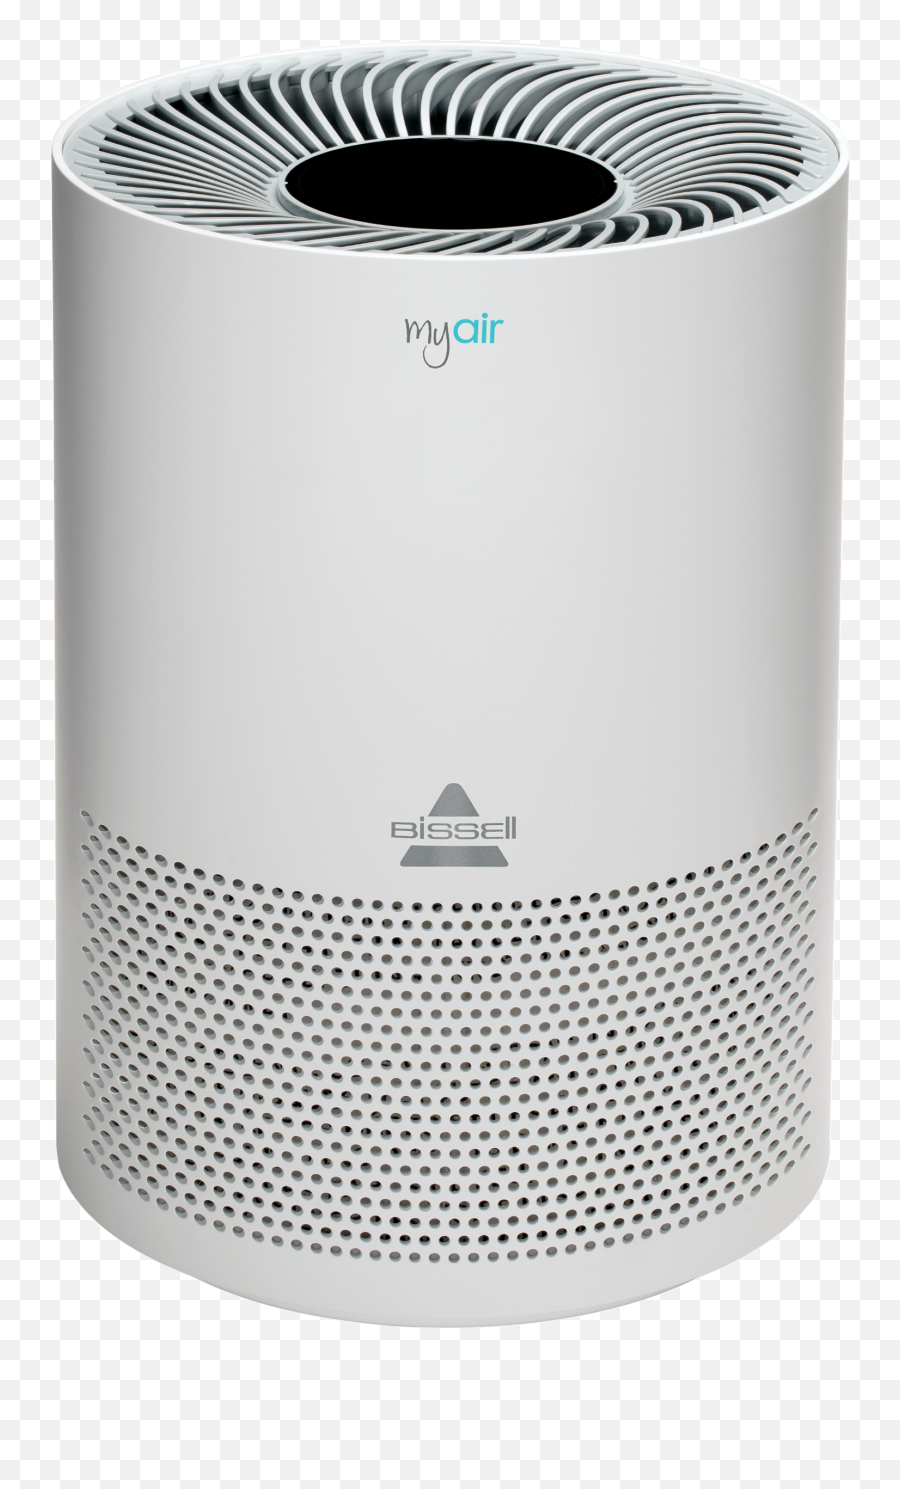 Bissell Myair Air Purifier 2780a Quality Products - Science Museum Png,Air Filter Icon